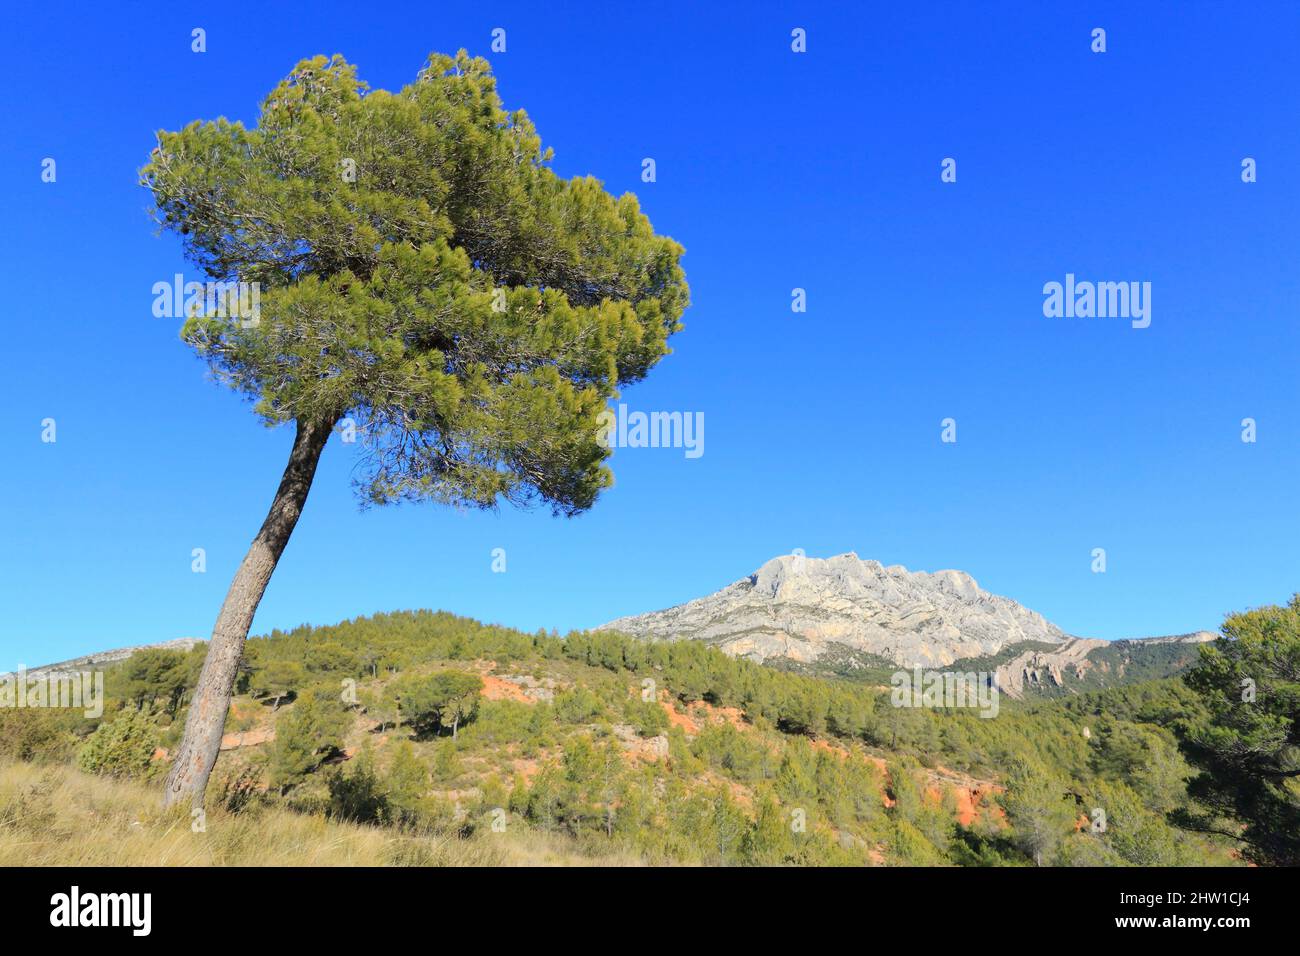 France, Bouches du Rhone, Grand Site Concors Sainte Victoire, departmental domain of Roques Hautes, Beaurecueil, pines with the Sainte Victoire mountain in the background Stock Photo